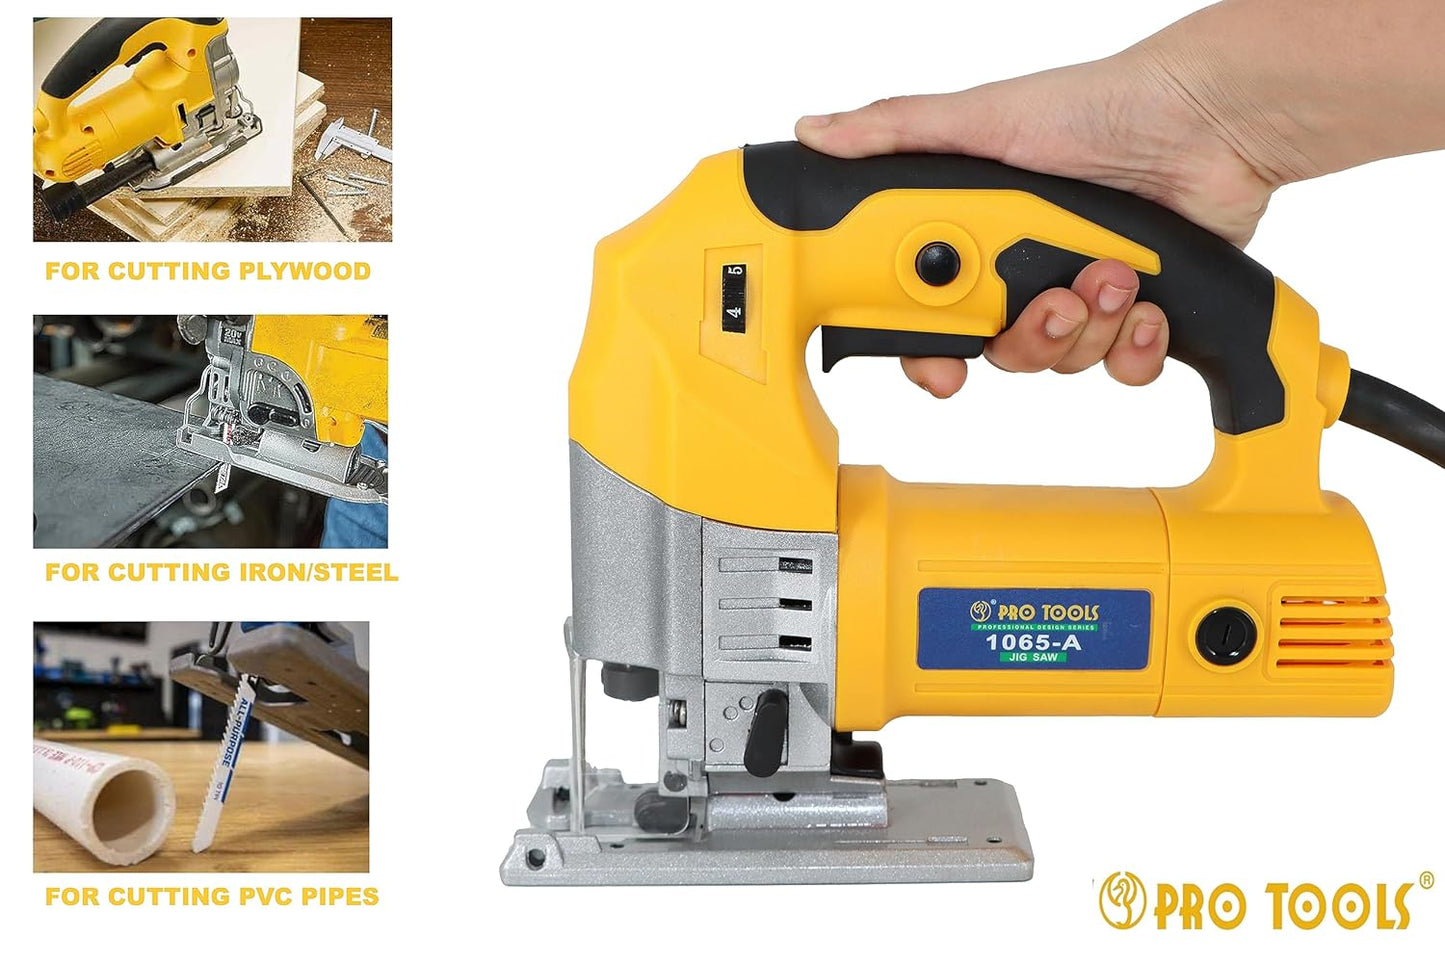 PRO TOOLS 1065-A, 600W | 500-3000rpm | Max Cutting Depth 65mm Corded Jigsaw for Wood, Cutting Iron/Steel